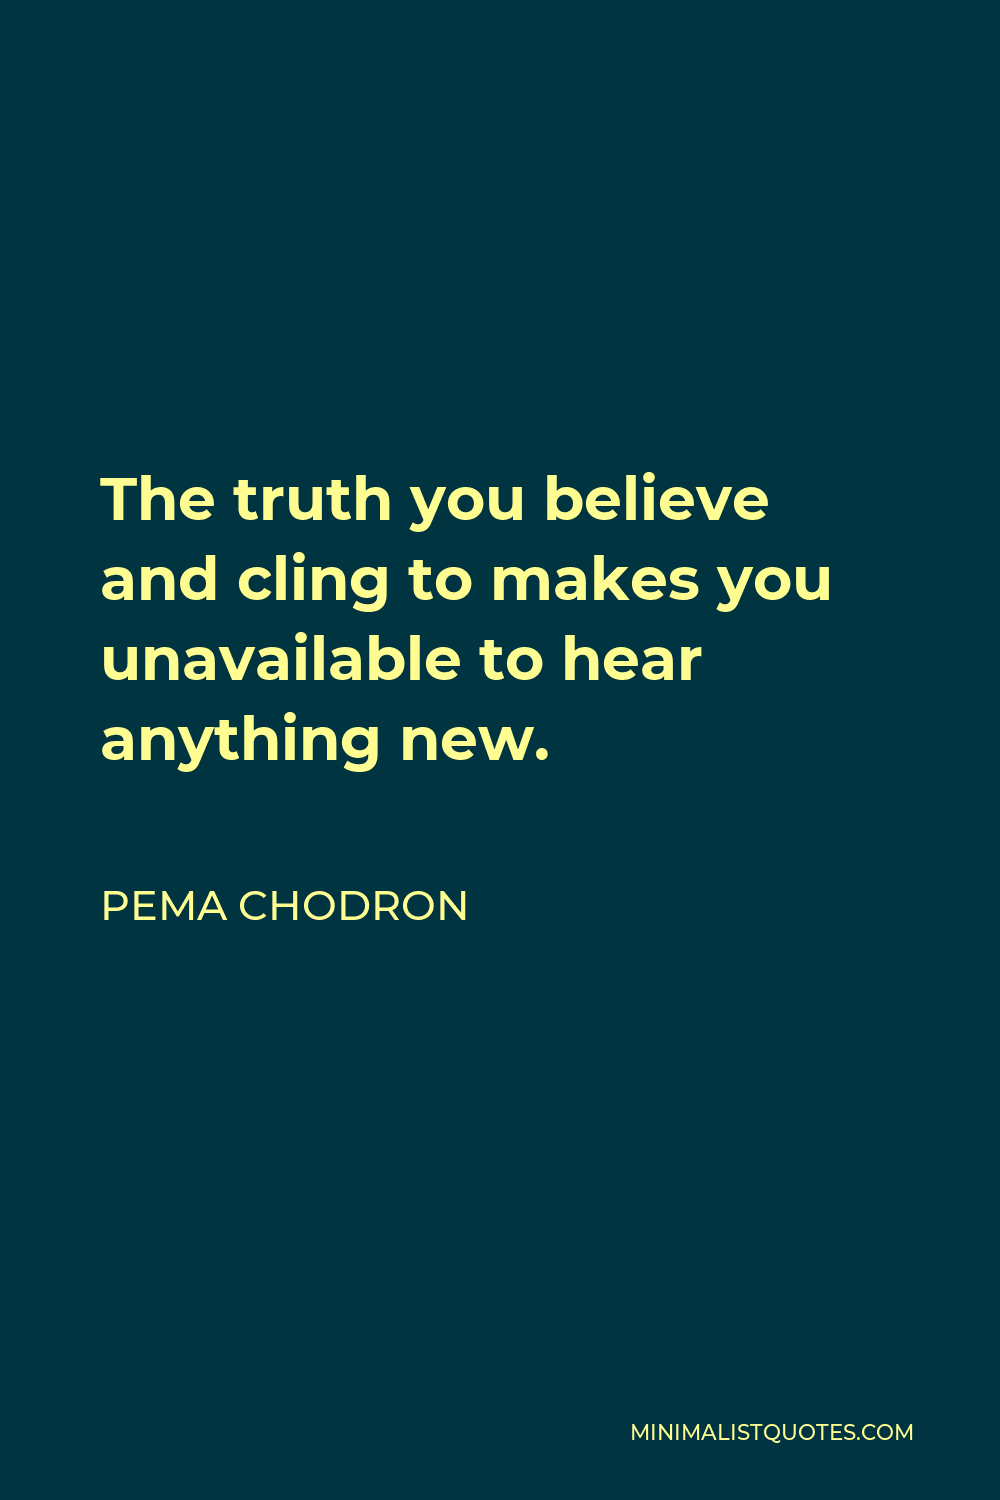 Pema Chodron Quote - The truth you believe and cling to makes you unavailable to hear anything new.